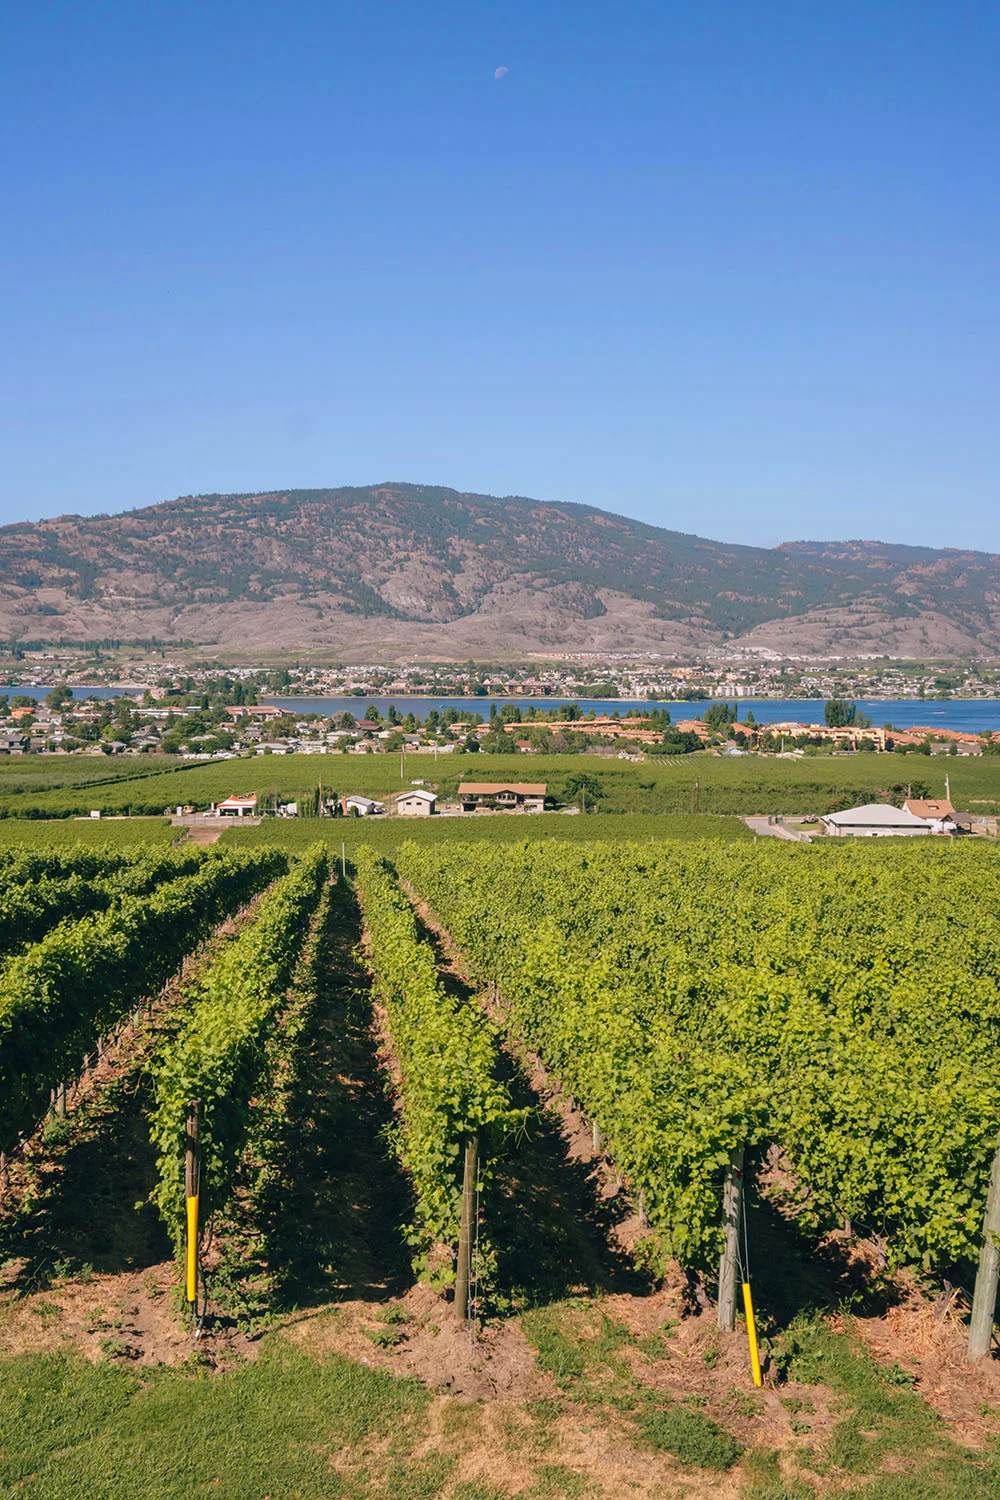 Planning a visit to the Oliver & Osoyoos regions of the Okanagan soon? You don't want to miss this guide to the best wineries in Oliver & Osoyoos! This guide is divided into the best wineries in Oliver and the best wineries in Osoyoos to help make planning your wine tasting route easy. Get ready to enjoy some of the Okanagan’s best wineries! Pictured here: Moon Curser Vineyards